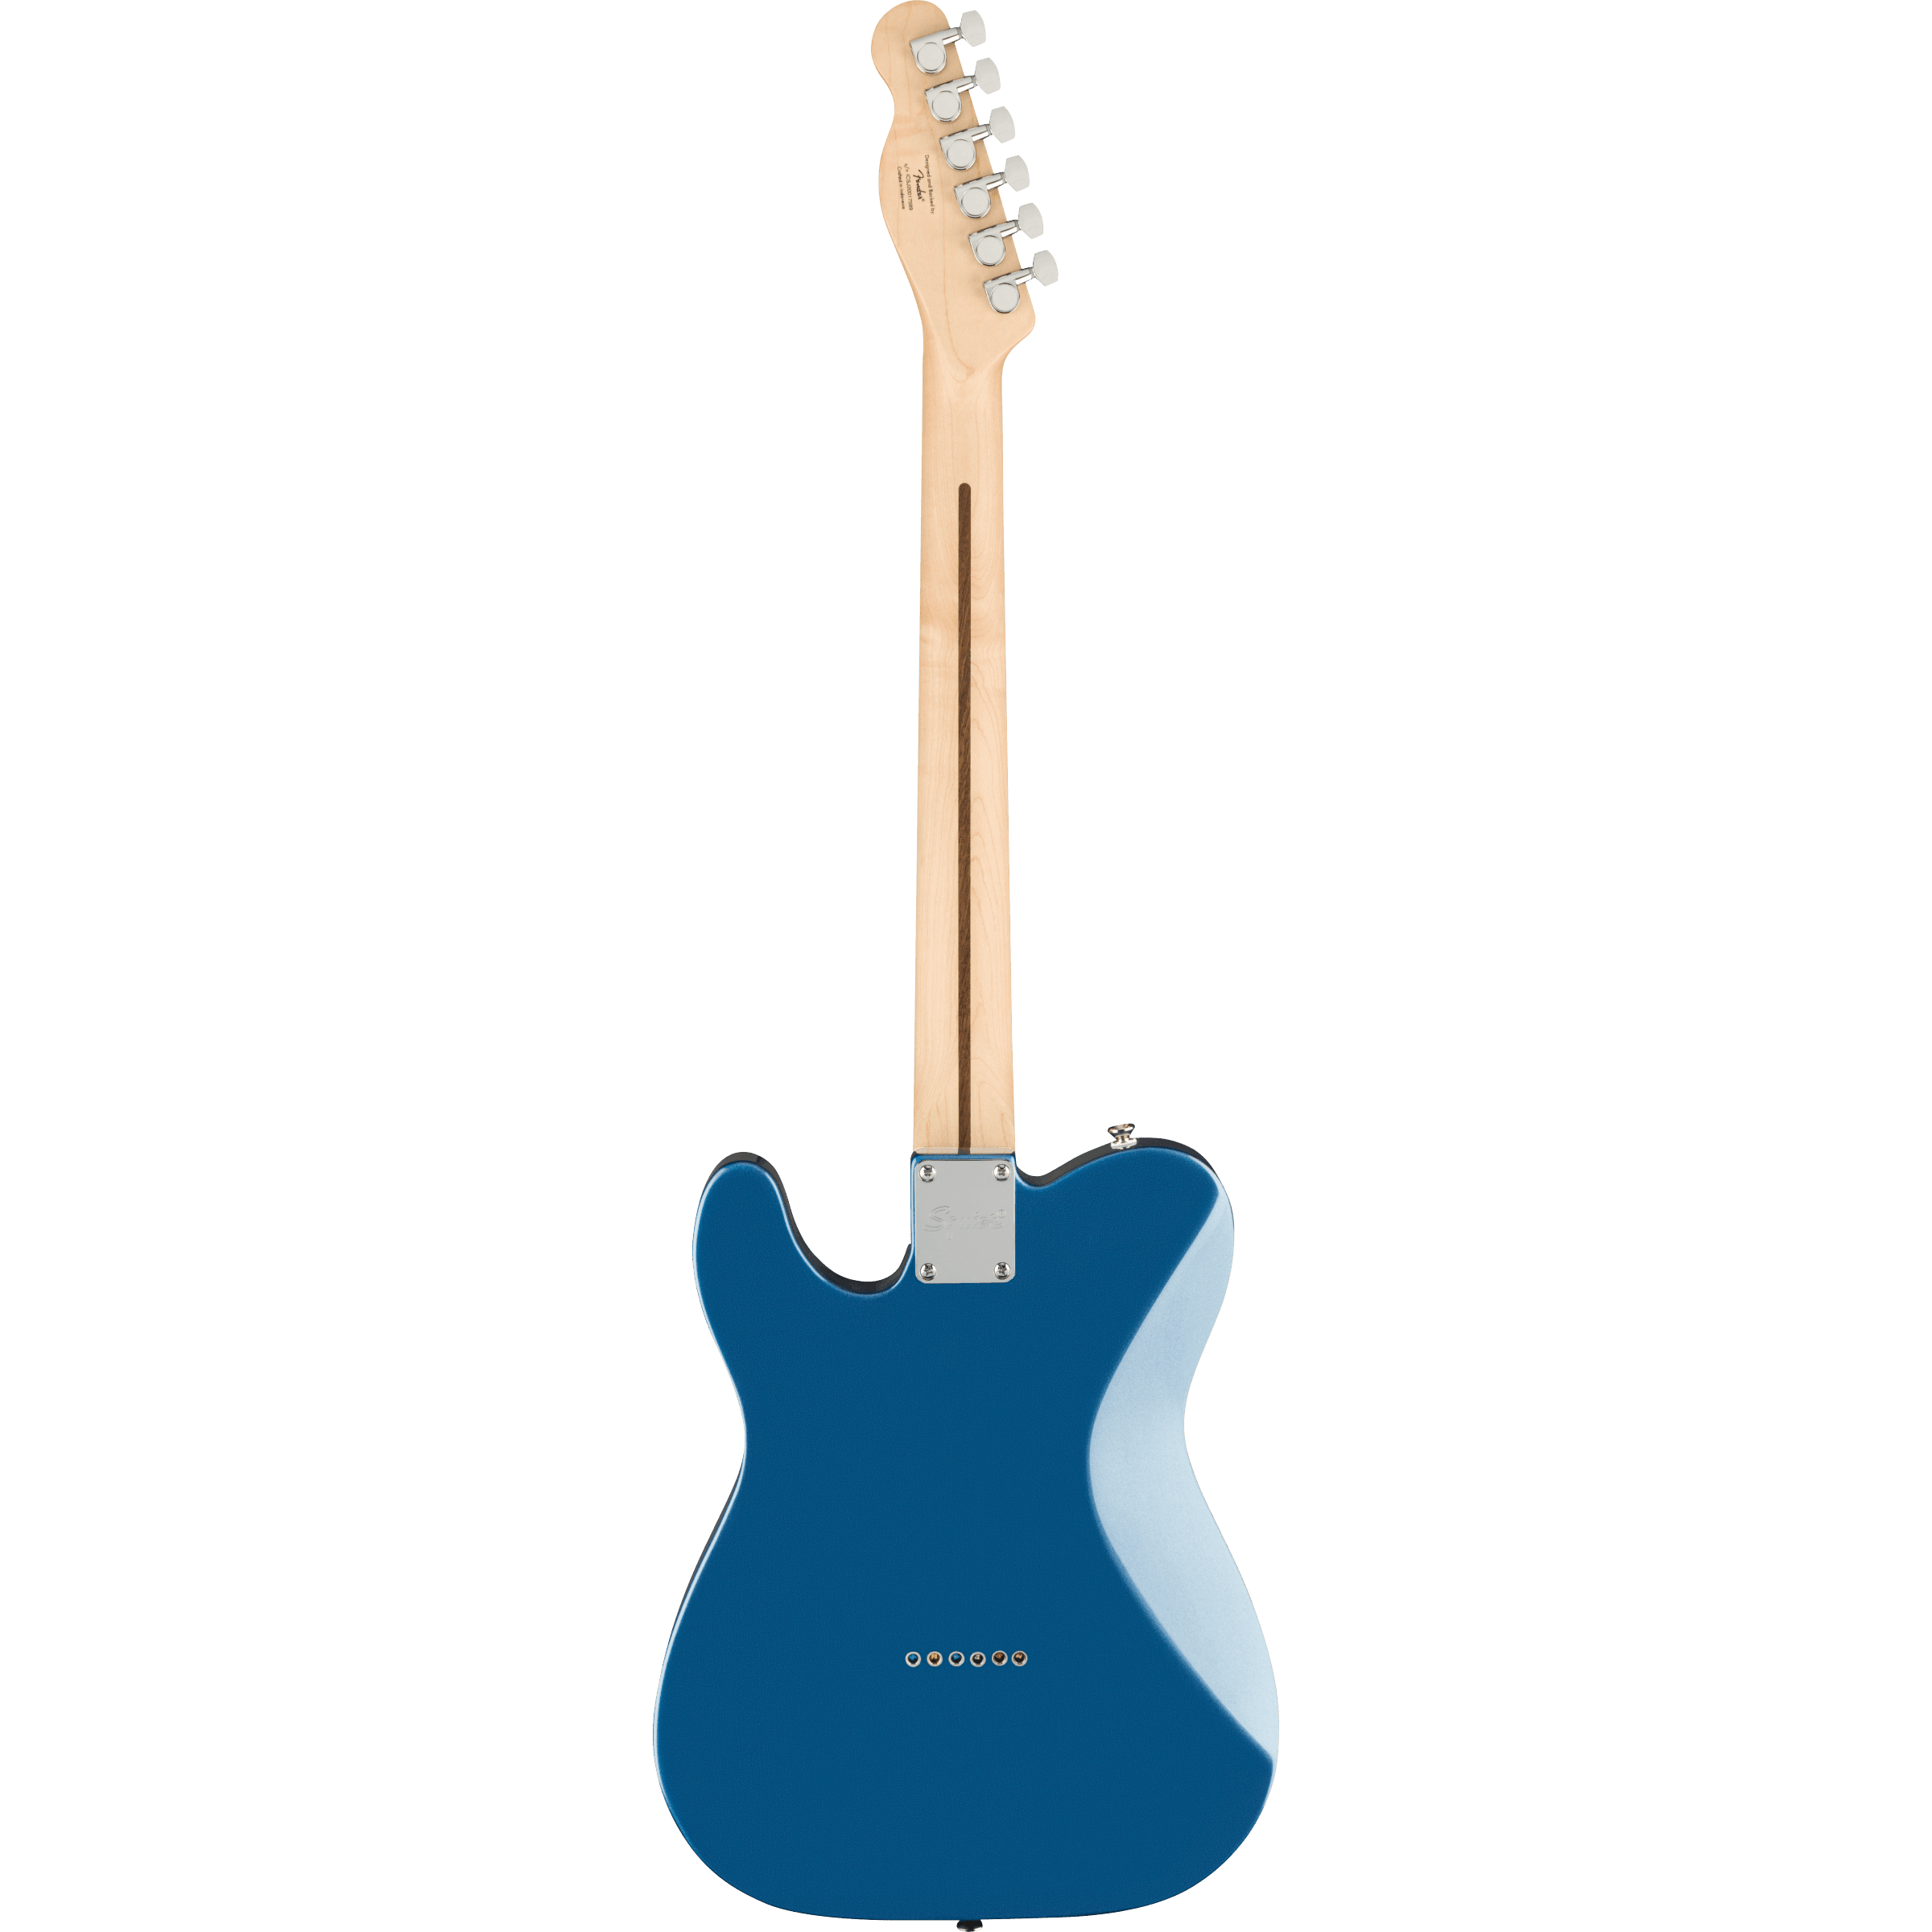 Squier Affinity Tele Lake Placid Blue - Guitars - Electric by Fender at Muso's Stuff